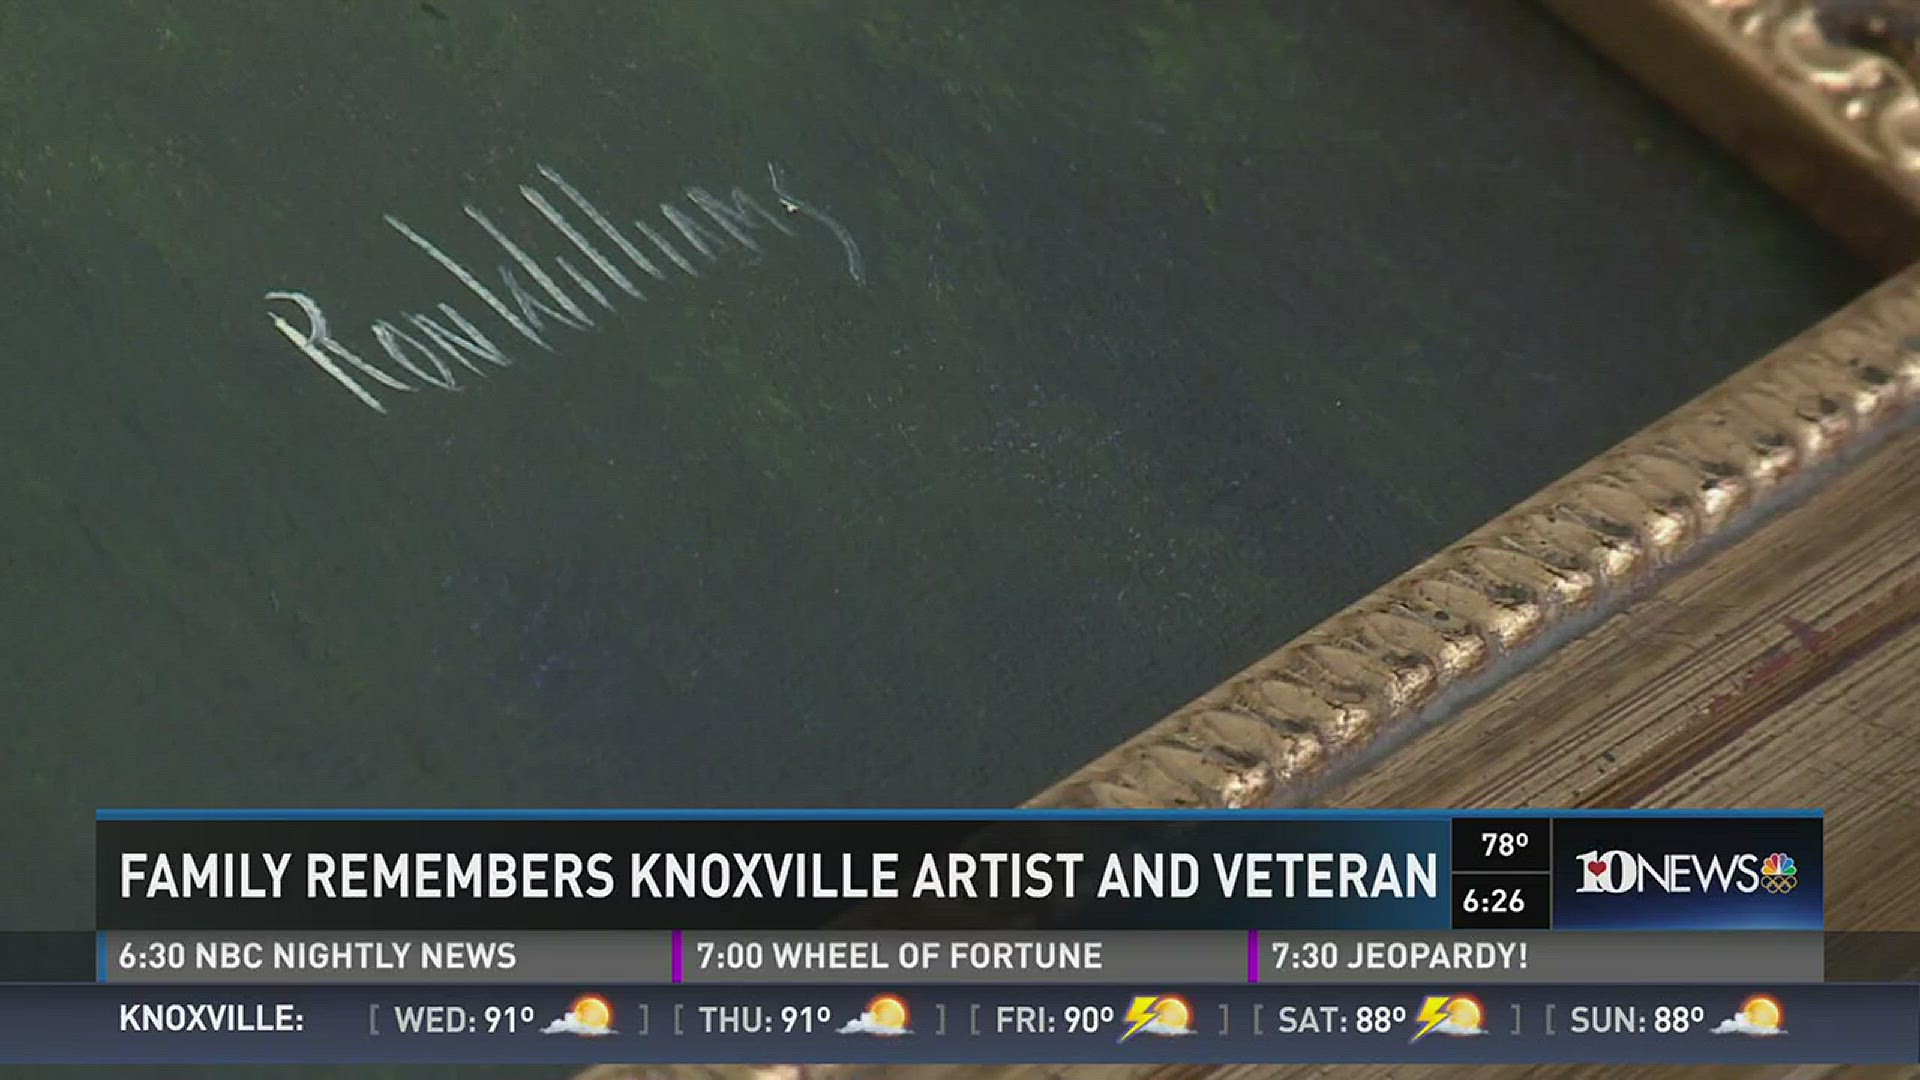 Knoxville artist and veteran Ron Williams was remembered today after making his mark on the artistic community here in Knoxville.